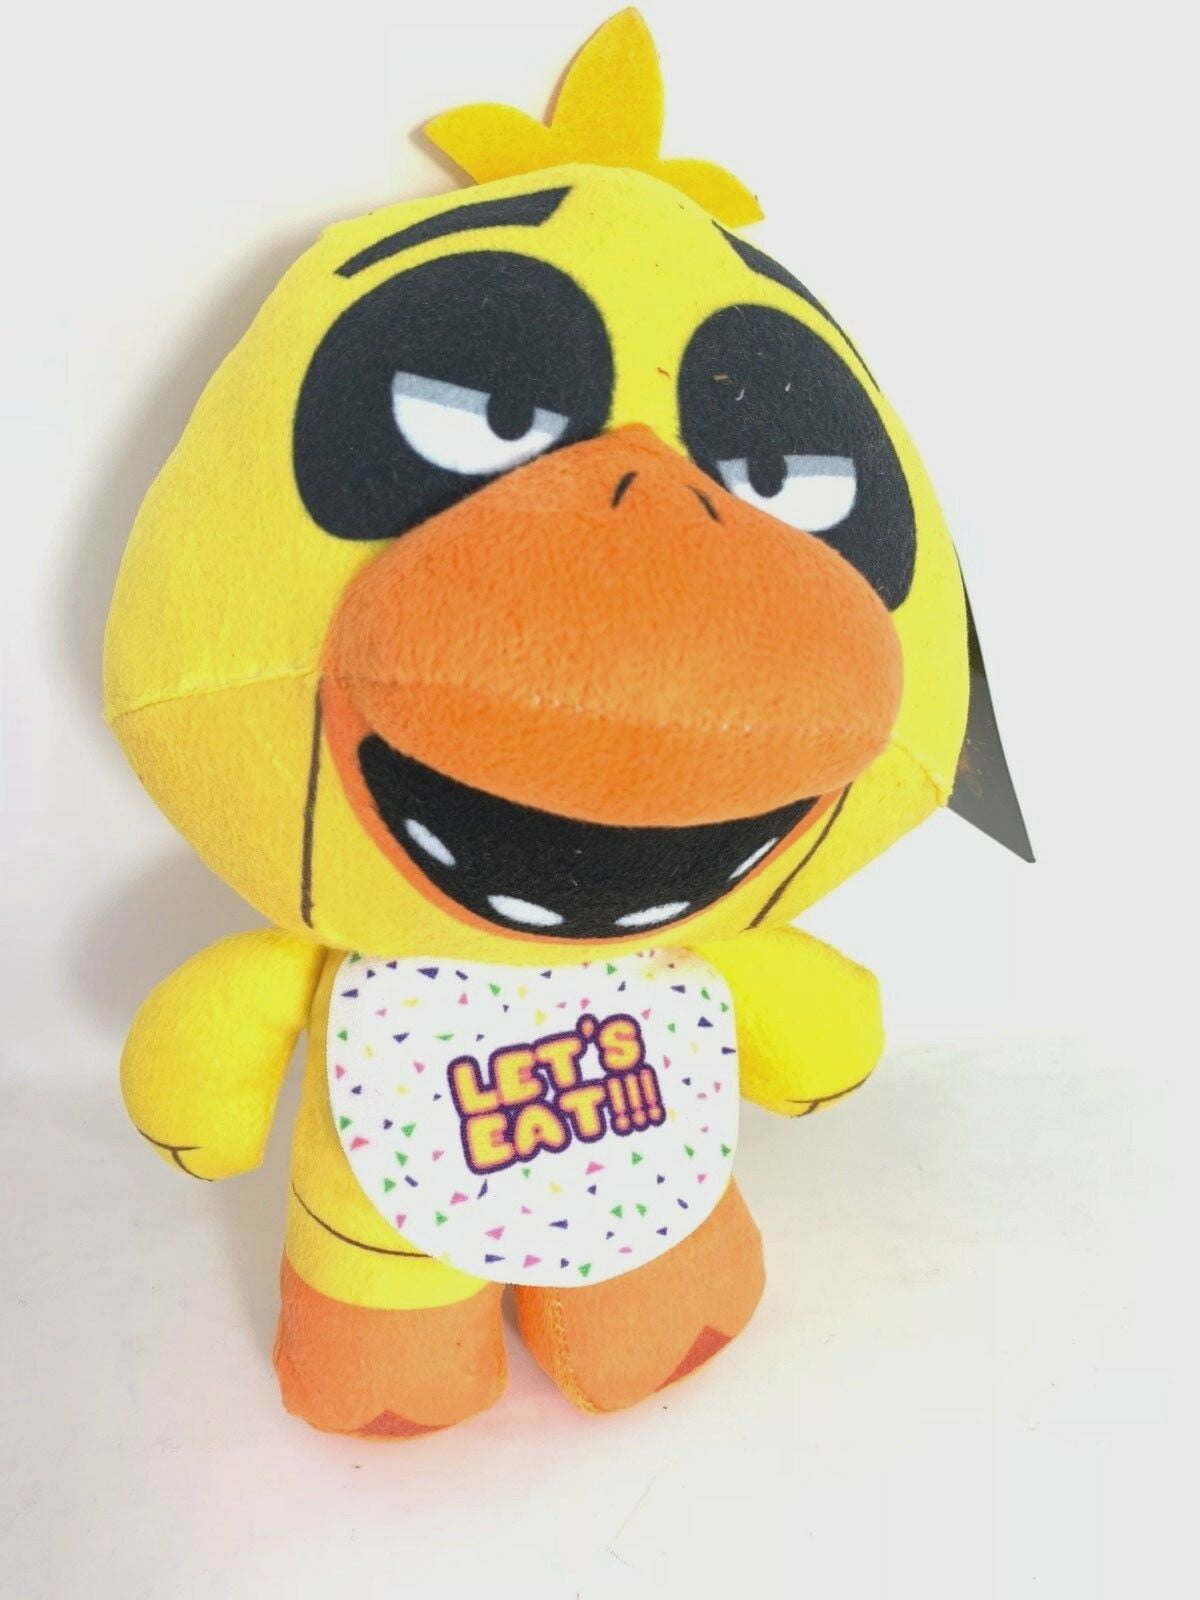 Five Nights At Freddy's Chica Plush 14” Let's Eat FNAF Good Stuff 2017 NWT